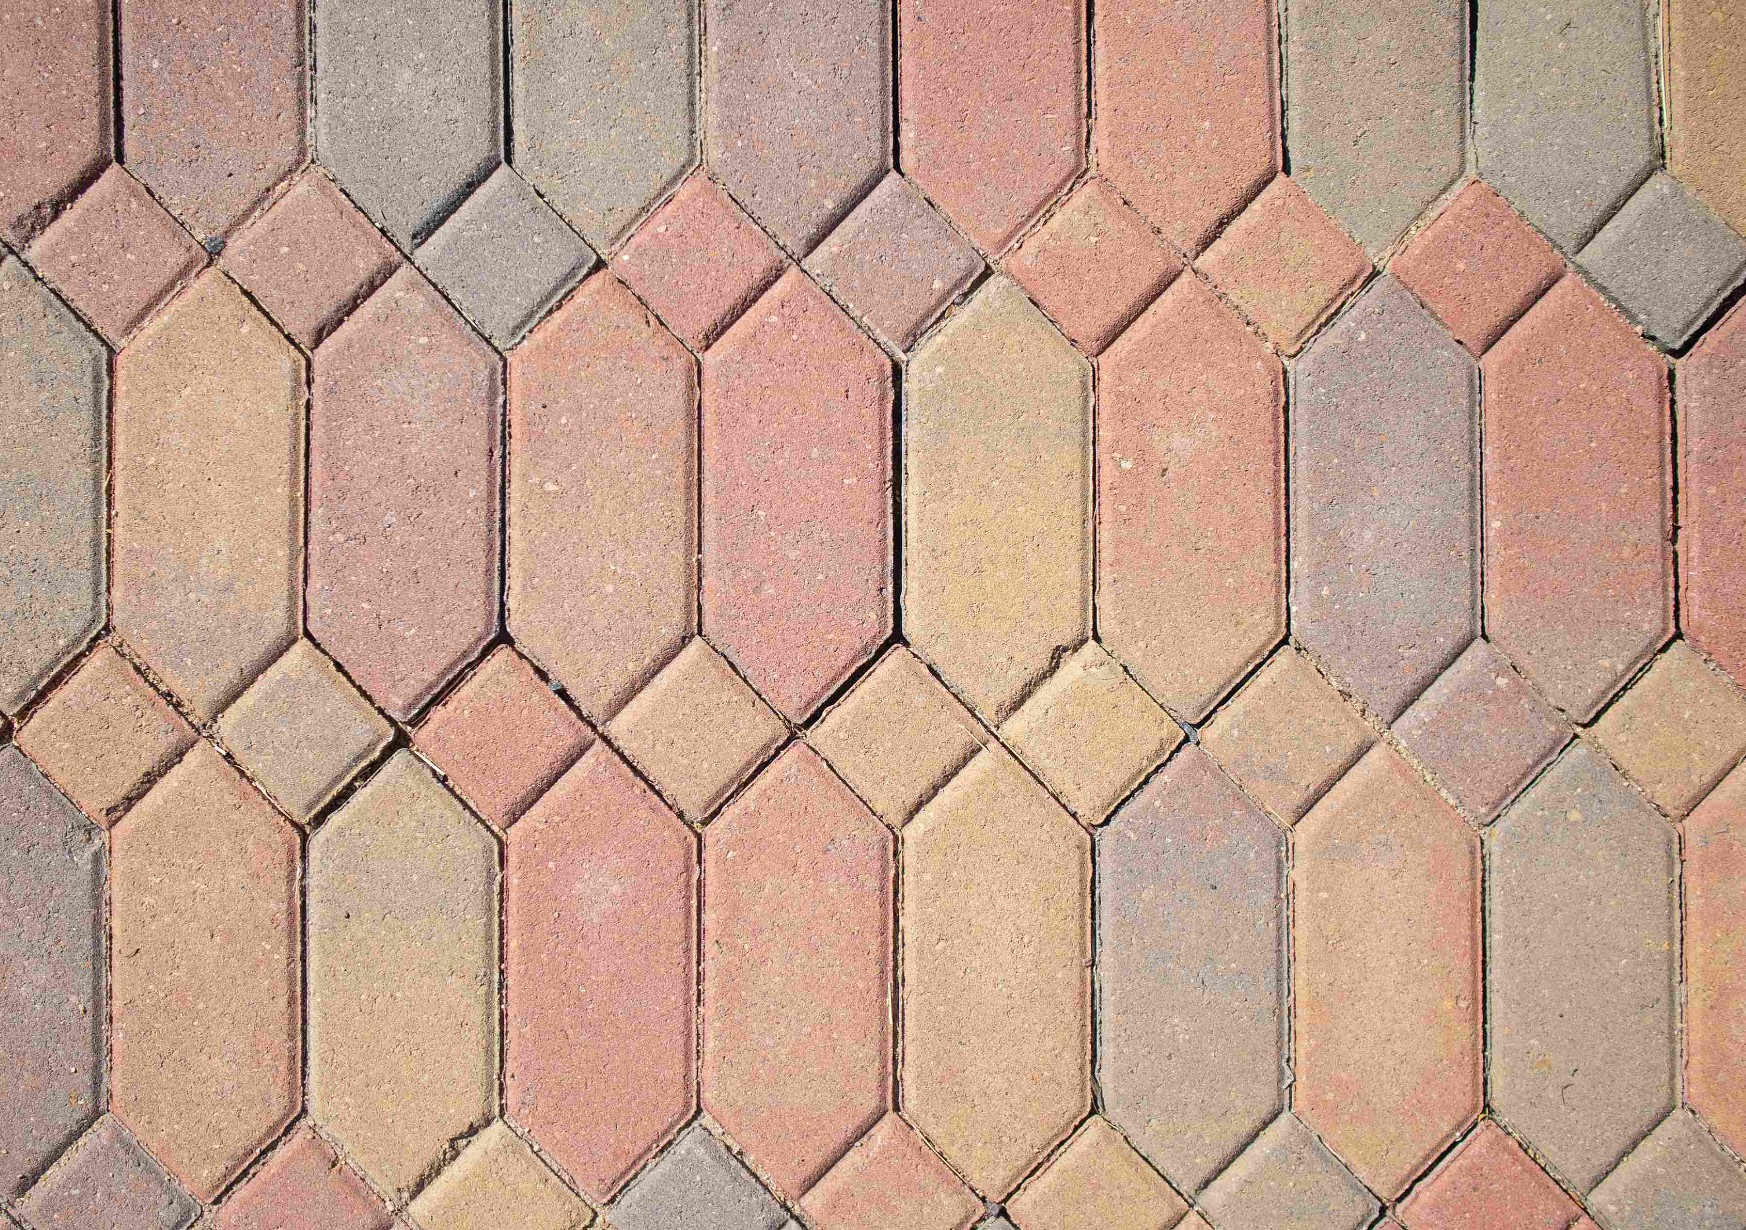 Coloured concrete with a brick pattern.